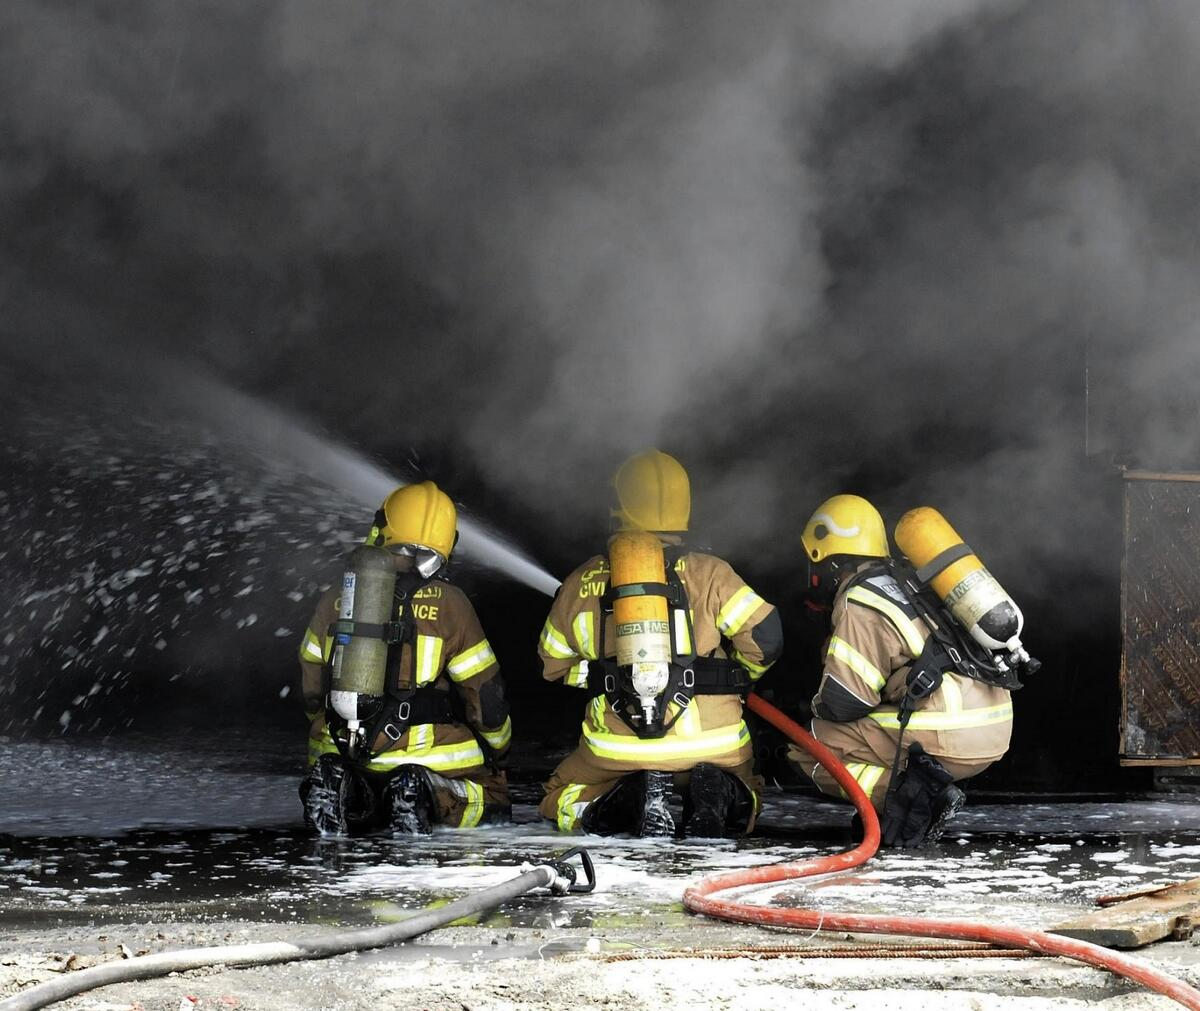 On Tuesday morning, the Abu Dhabi Civil Defence Authority and Abu Dhabi Police effectively extinguished a fire in a structure.